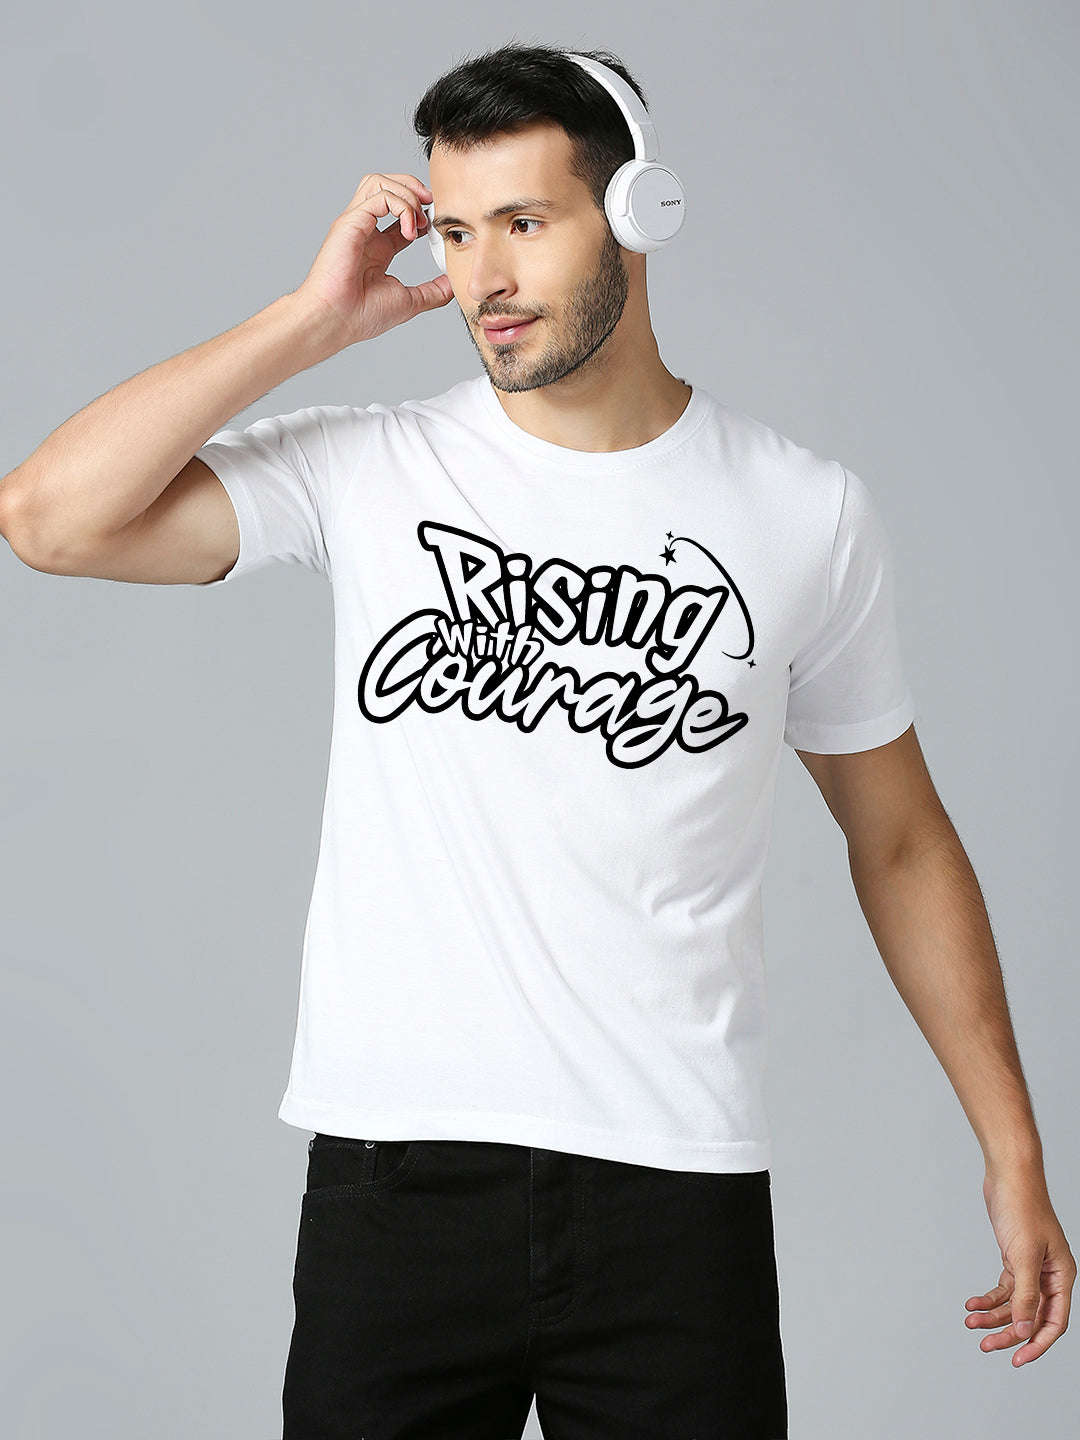 Rising With Courage T-Shirt